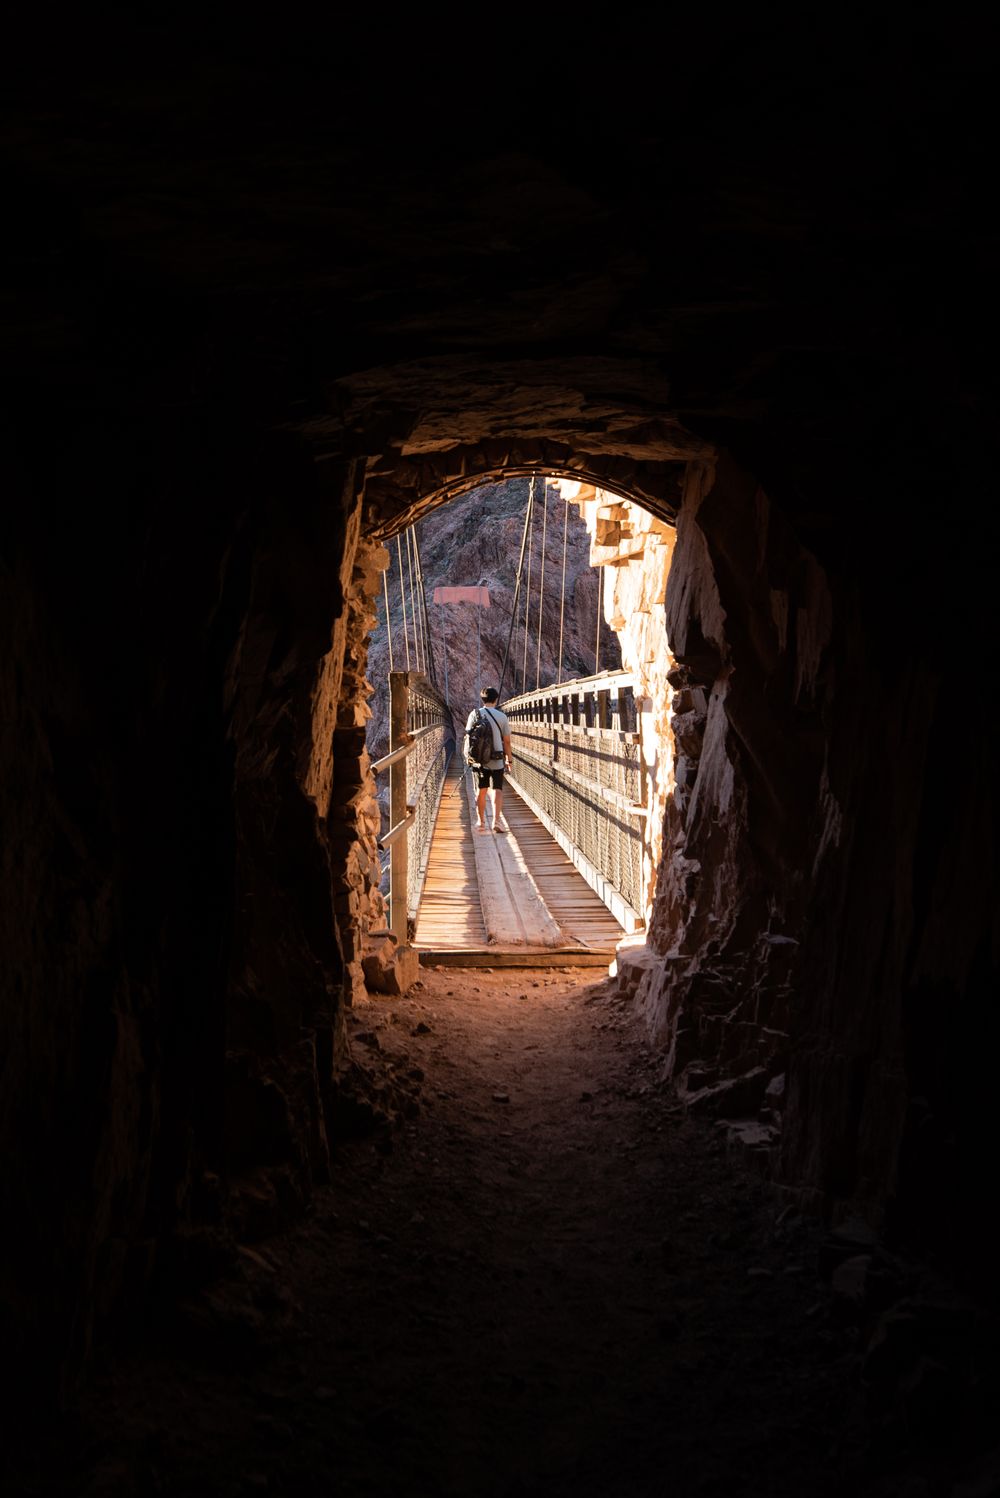 Finally nearing the end of our hike to the bottom of the Grand Canyon, my brother crossed the bridge in the light of the setting sun. I was a few steps behind in the darkness of the tunnel.